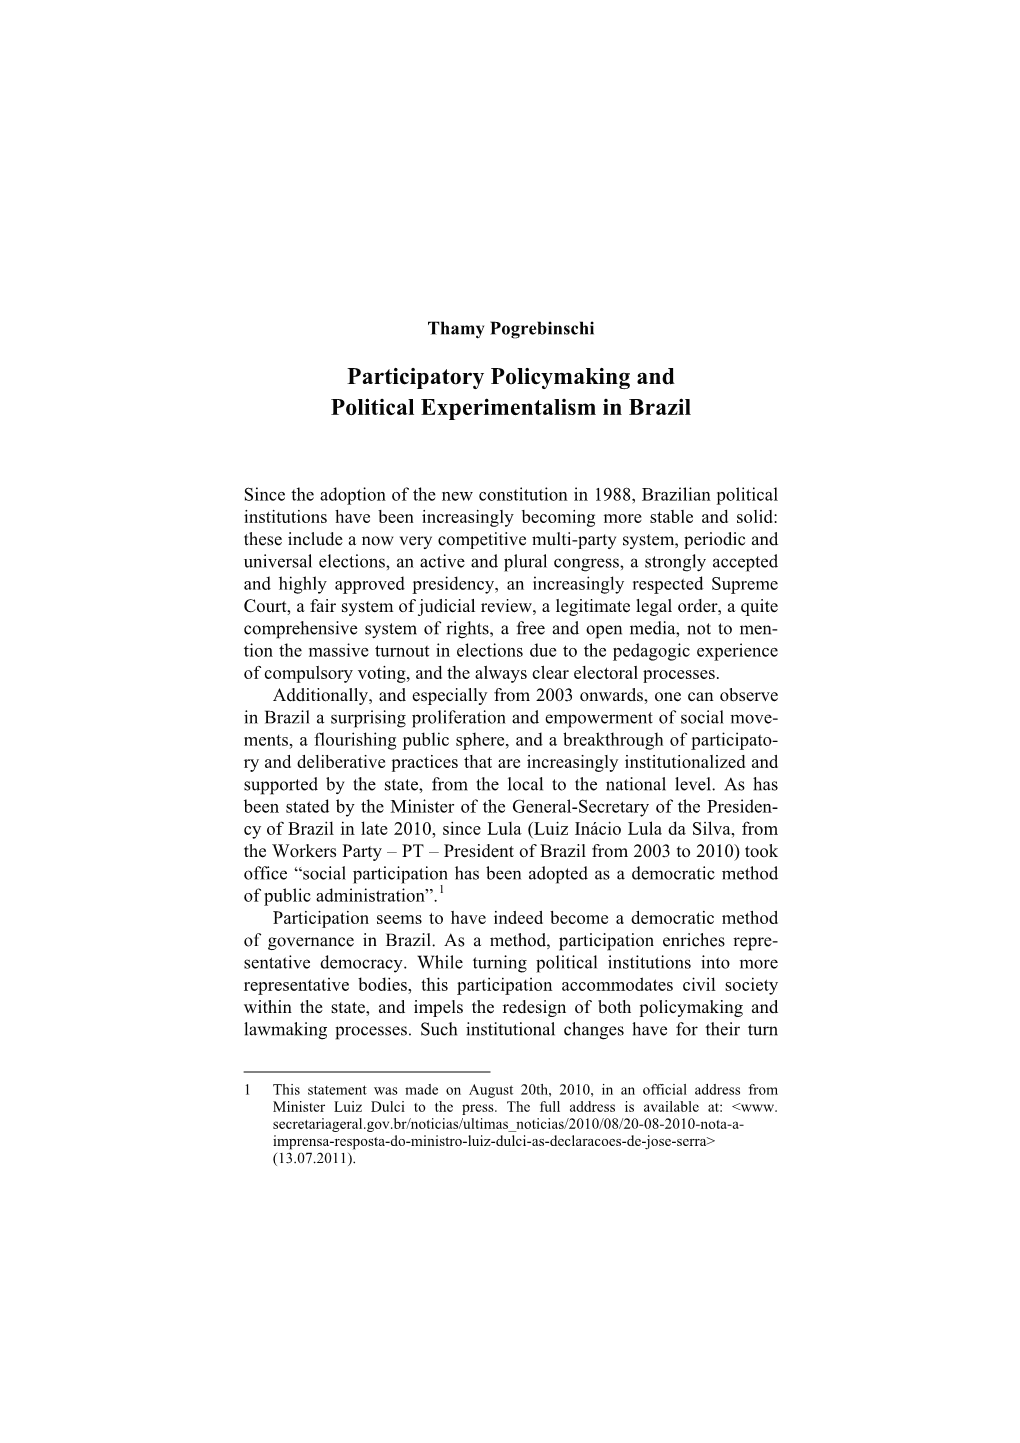 Participatory Policymaking and Political Experimentalism in Brazil